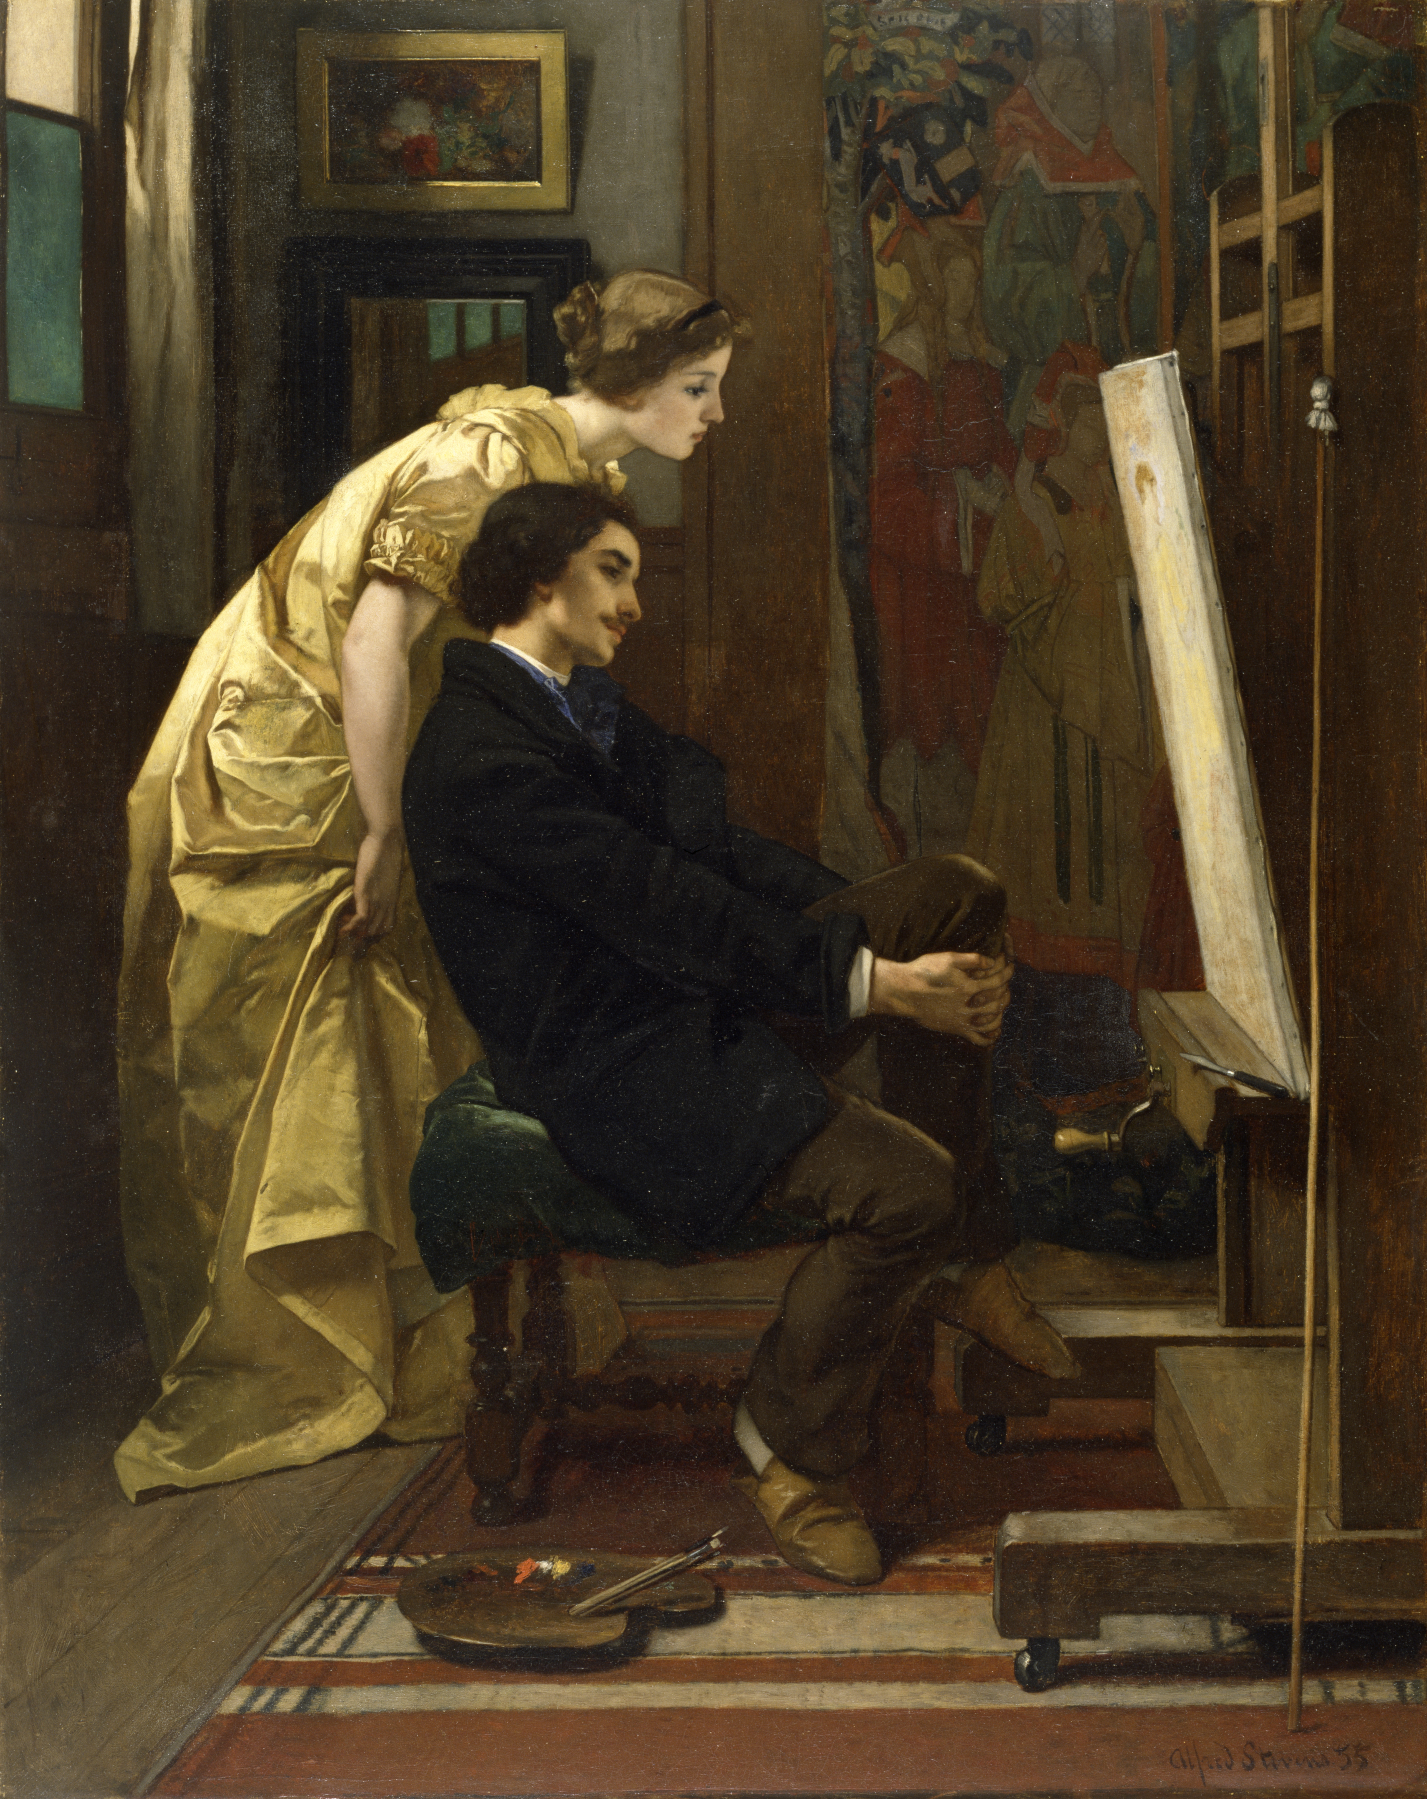 The Artist And His Model by Alfred Stevens, 1855